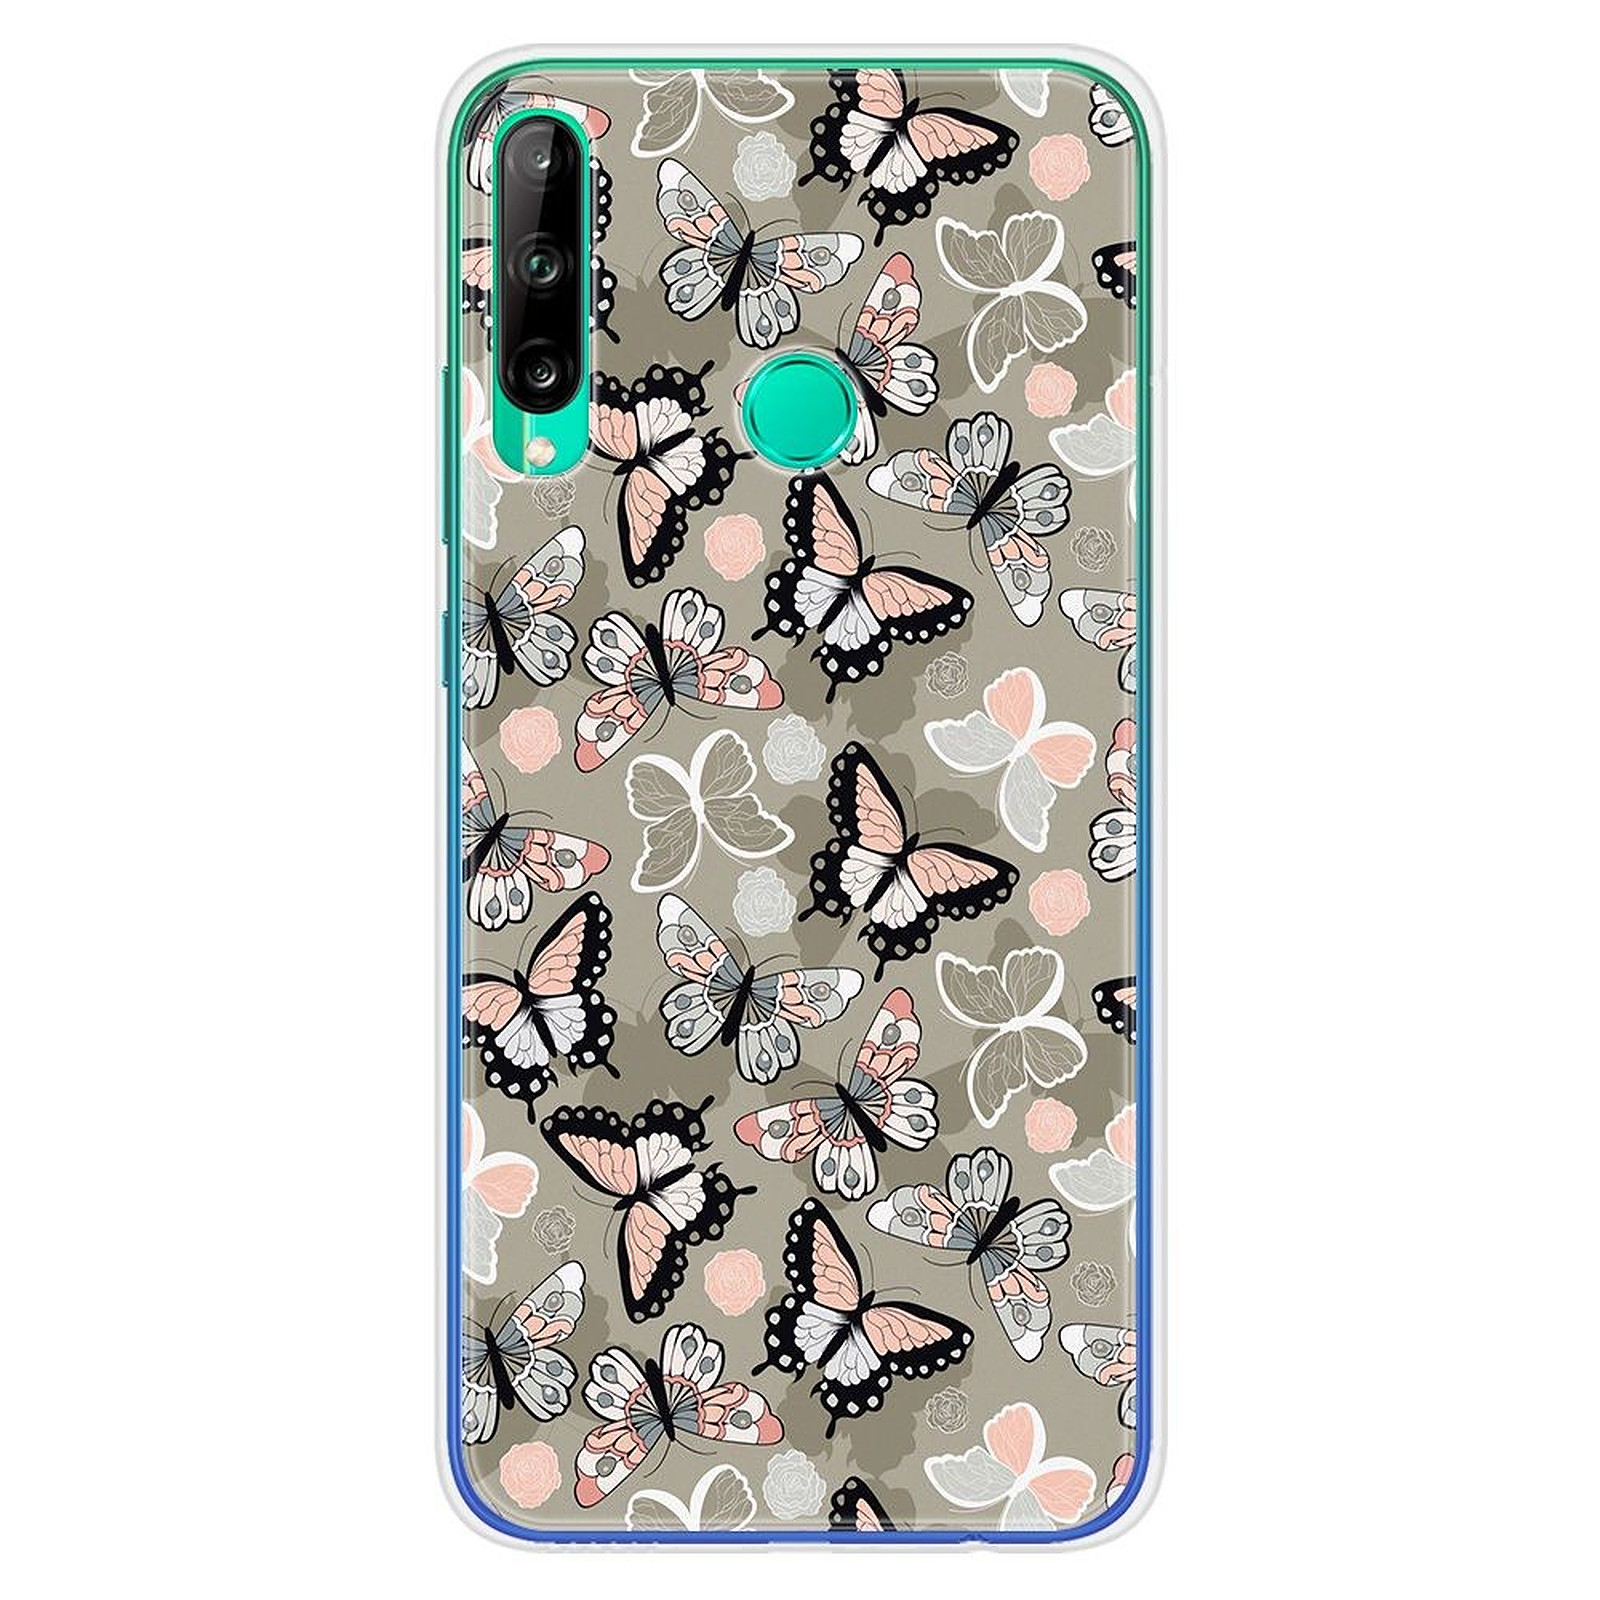 1001 Coques Coque silicone gel Huawei P40 Lite E motif Papillons Vintage - Coque telephone 1001Coques